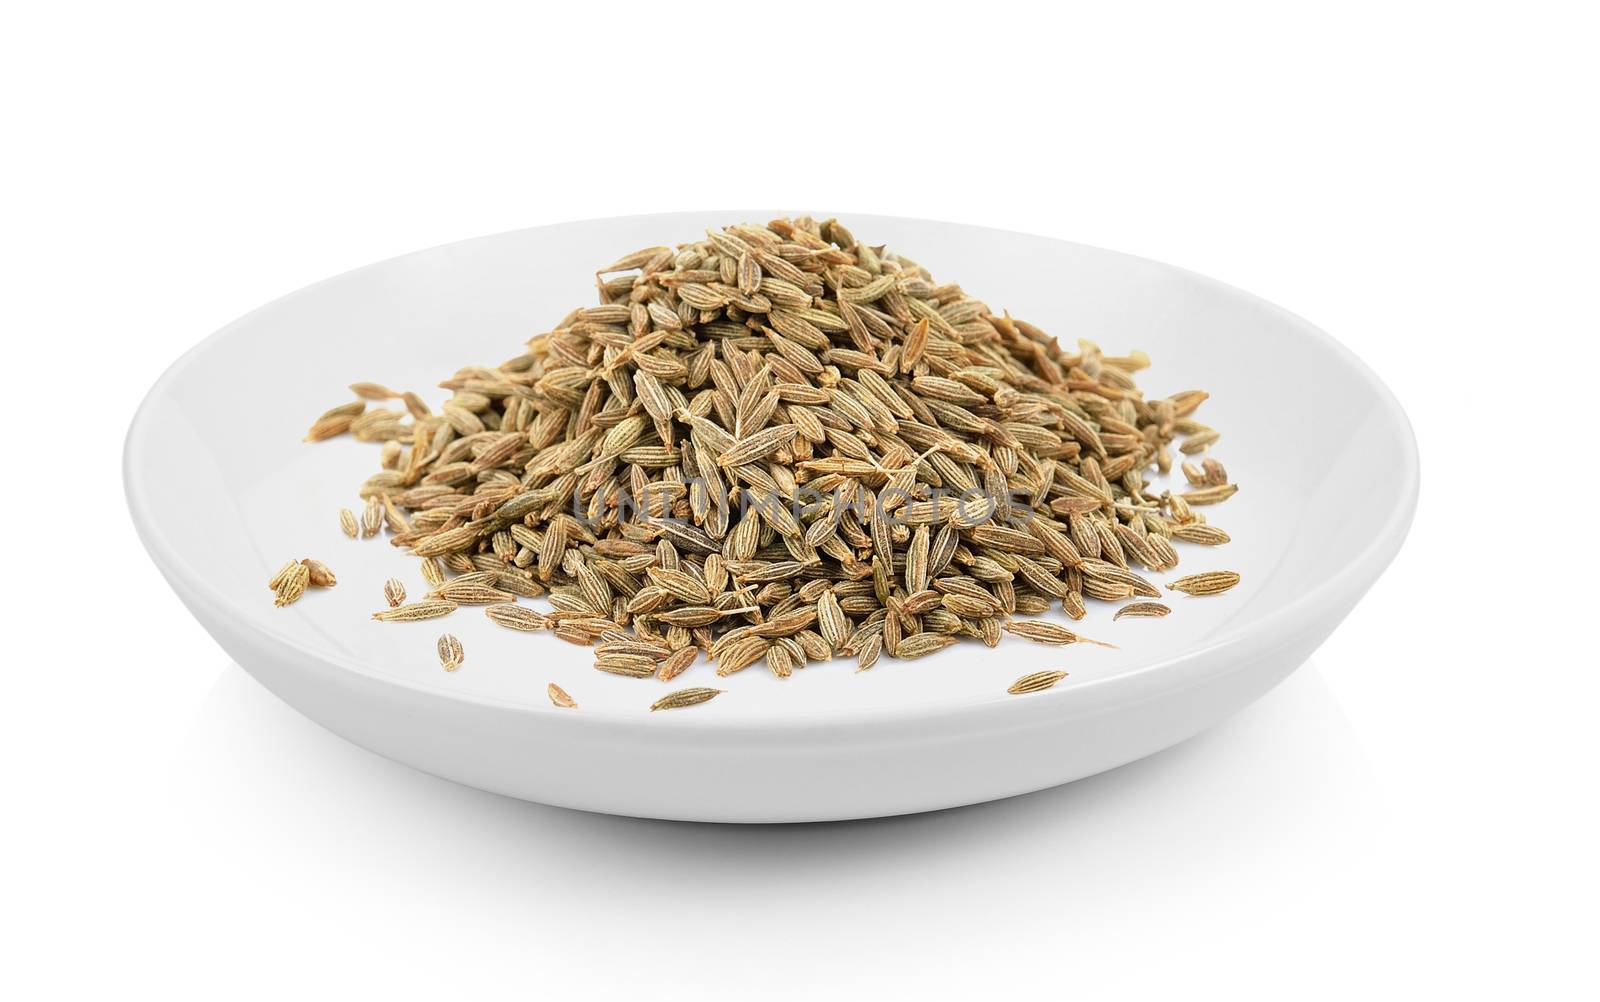 cumin seeds in plate on white background by sommai